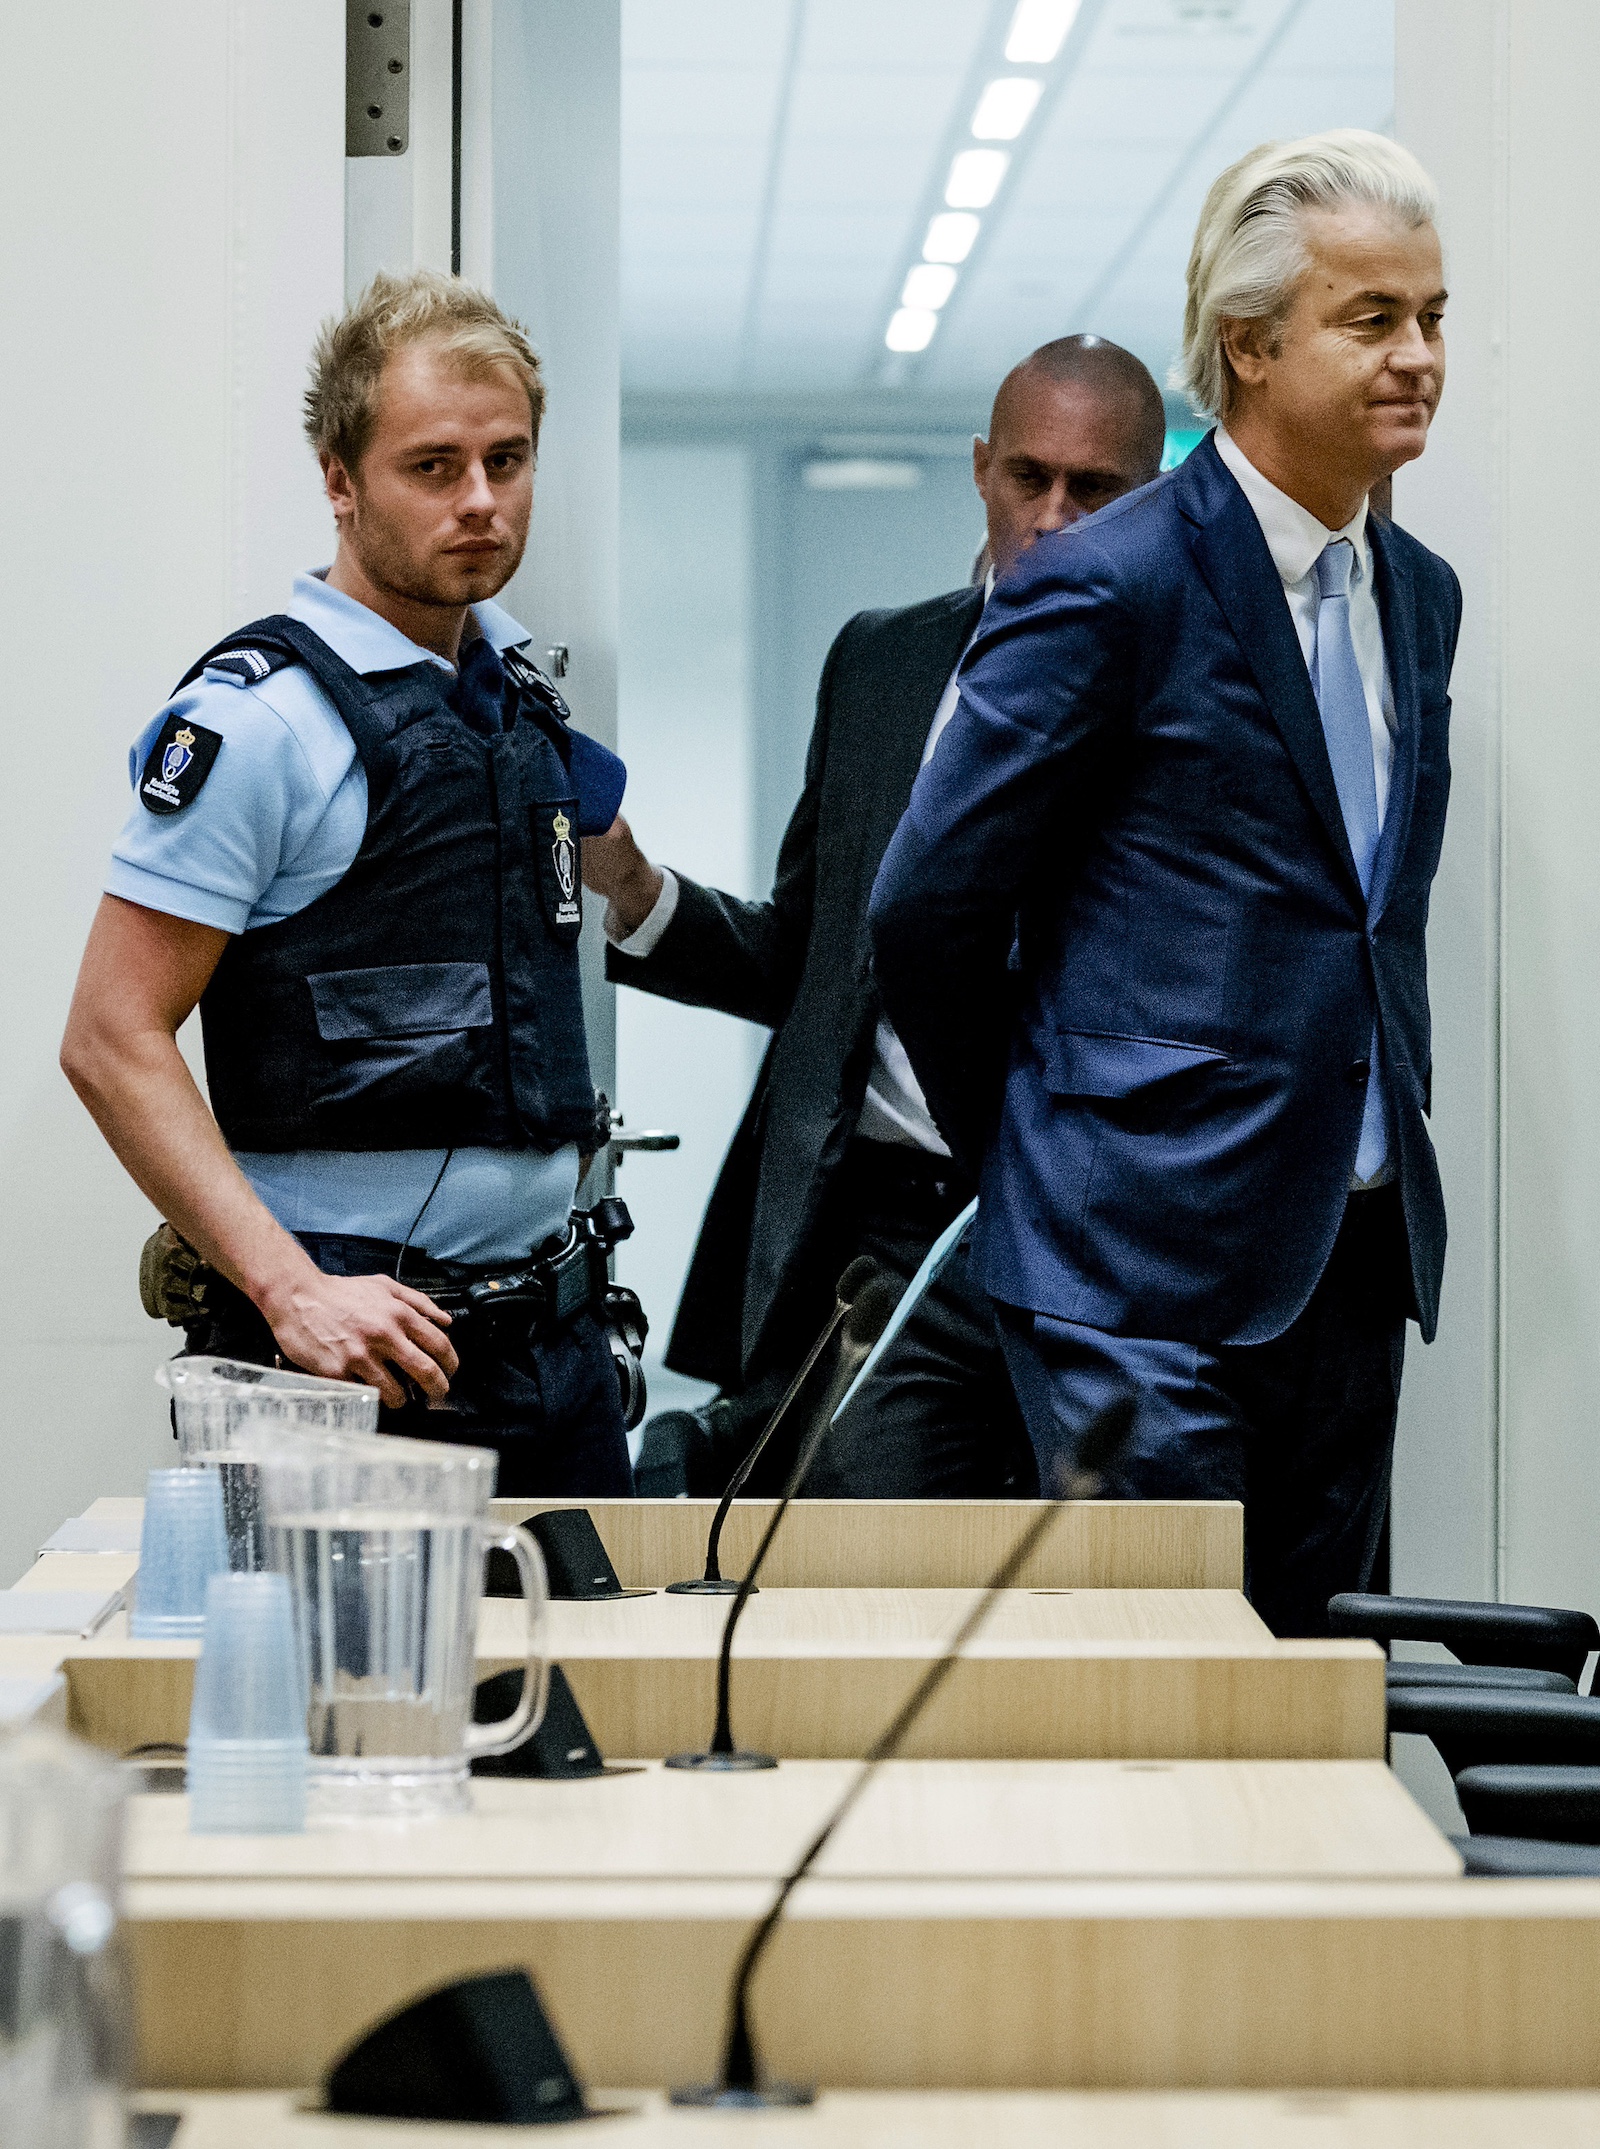 Geert Wilders facing charges hateful comments dutch